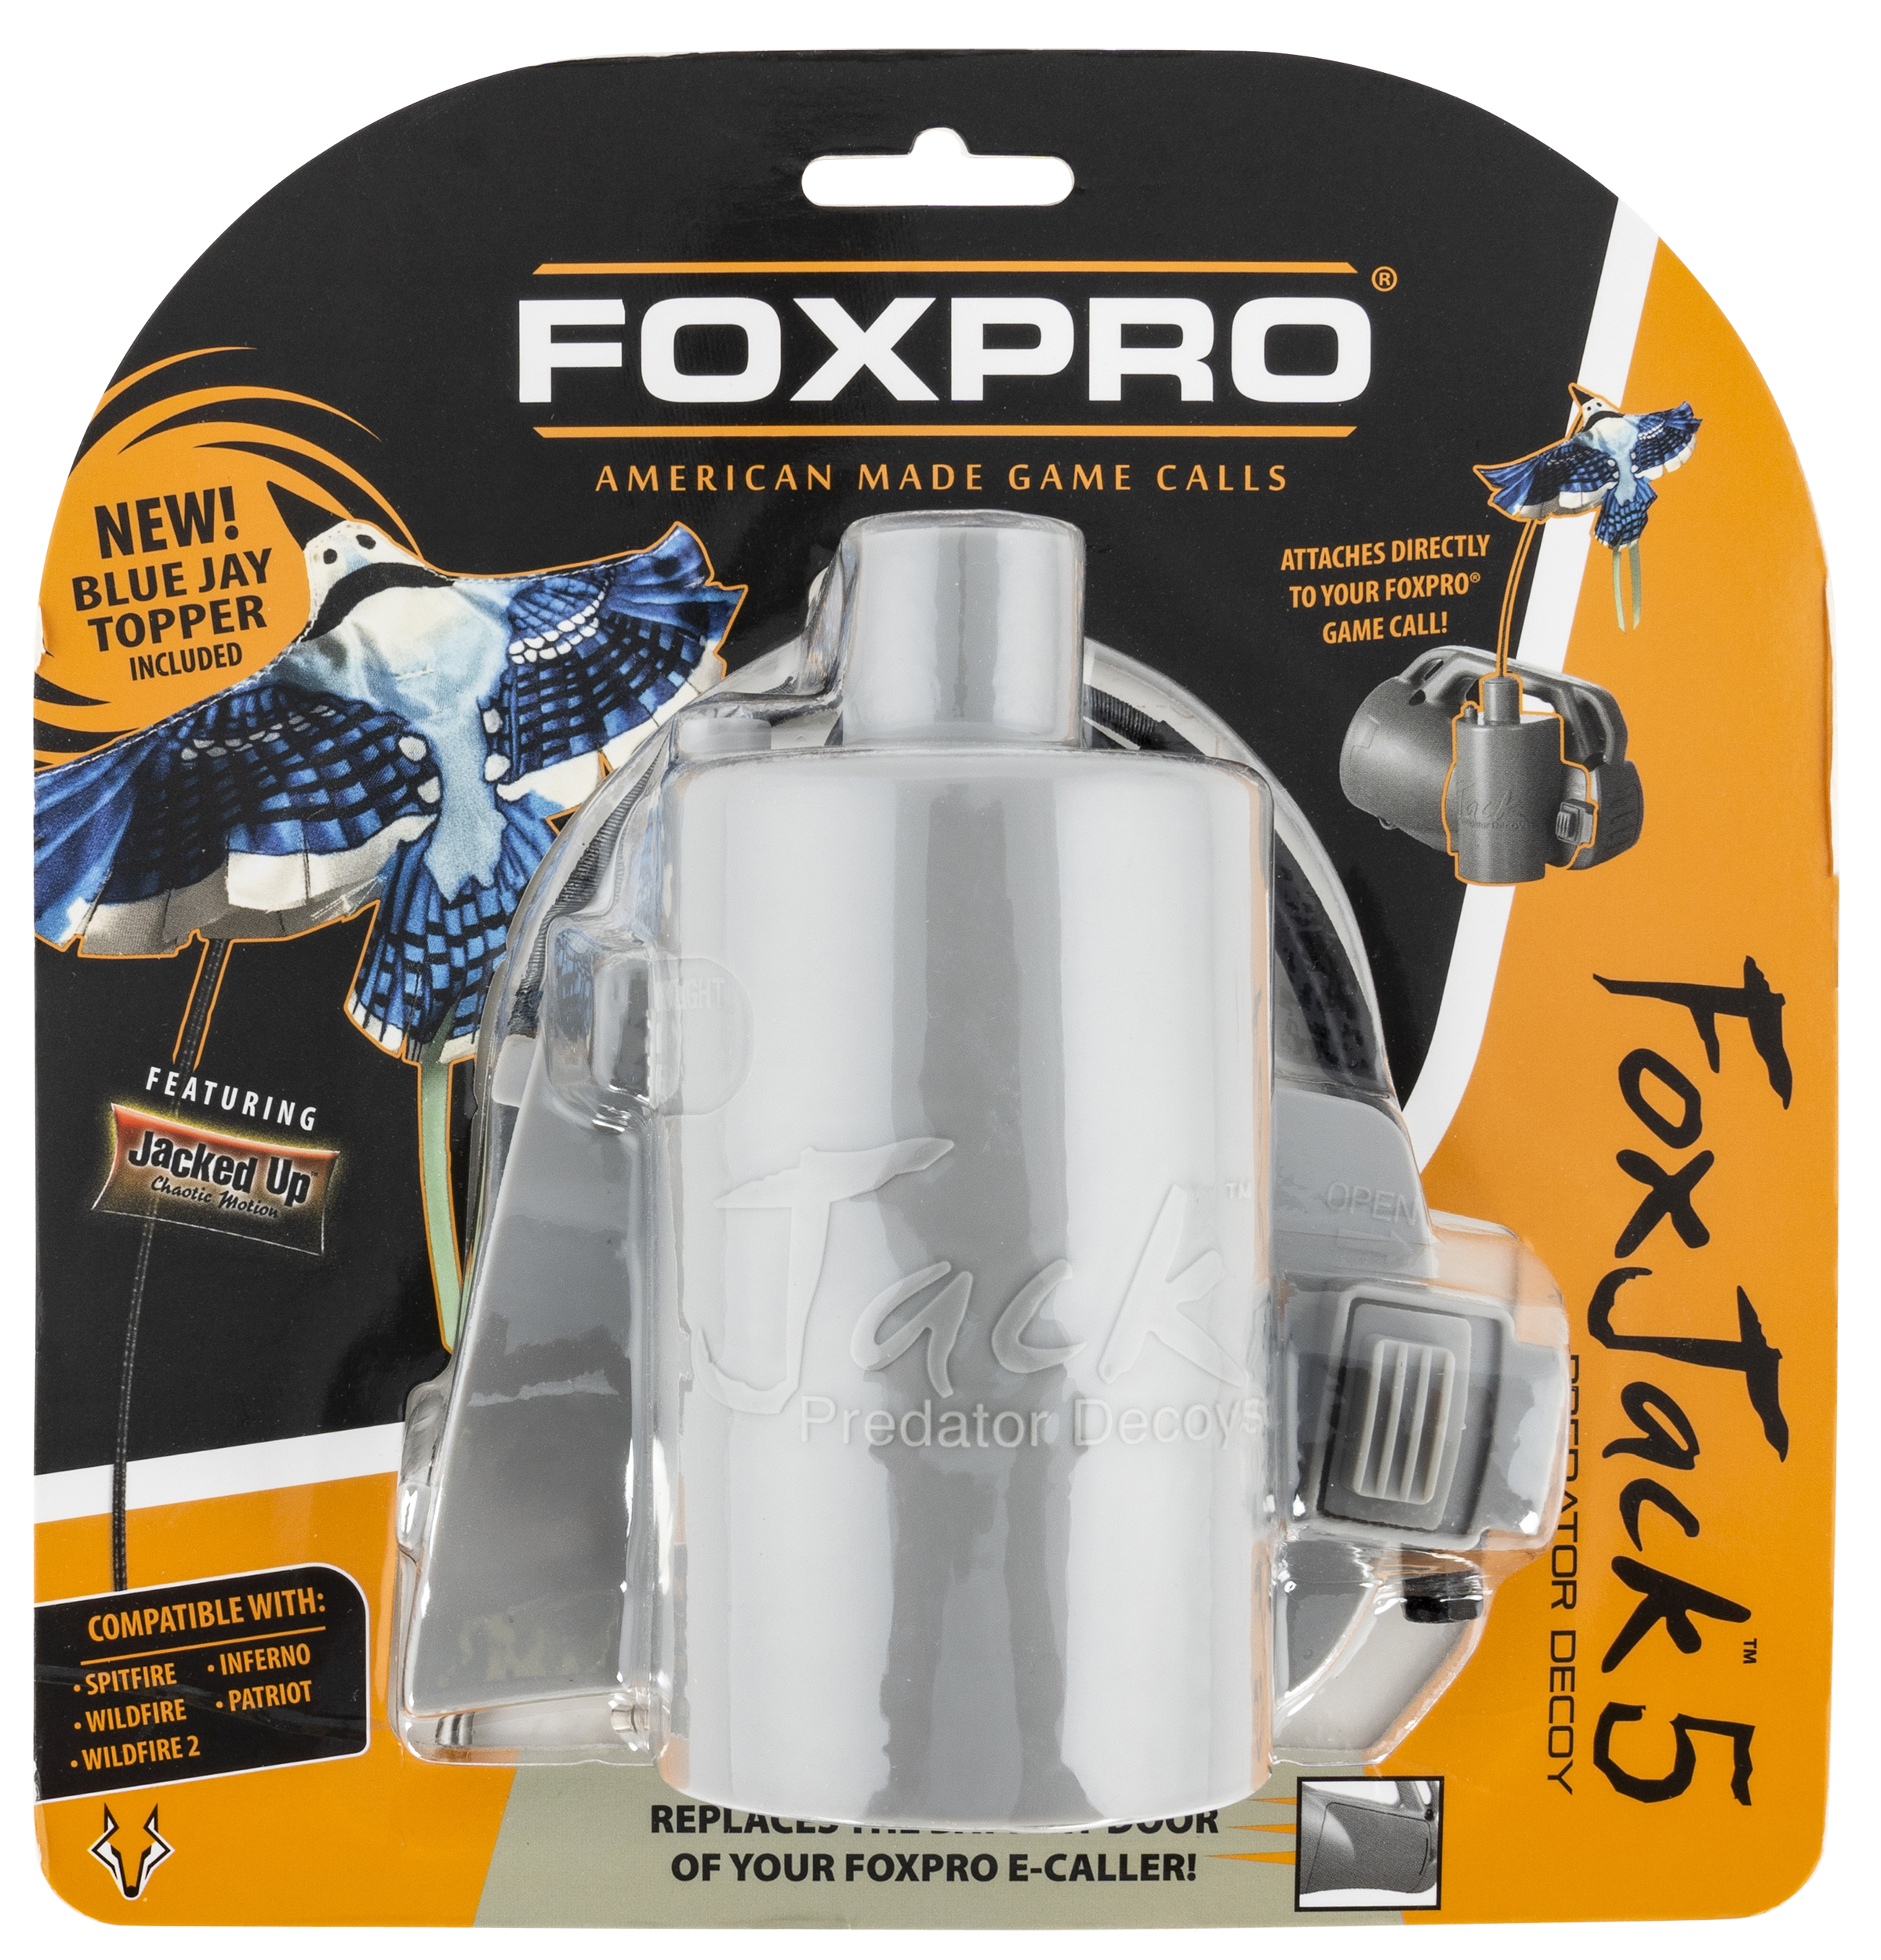 FOXPRO FoxJack 5 Blue Jay Species Gray Compatible With FoxPro Inferno/Patriot/Spitfire/Wildfire 1 & 2